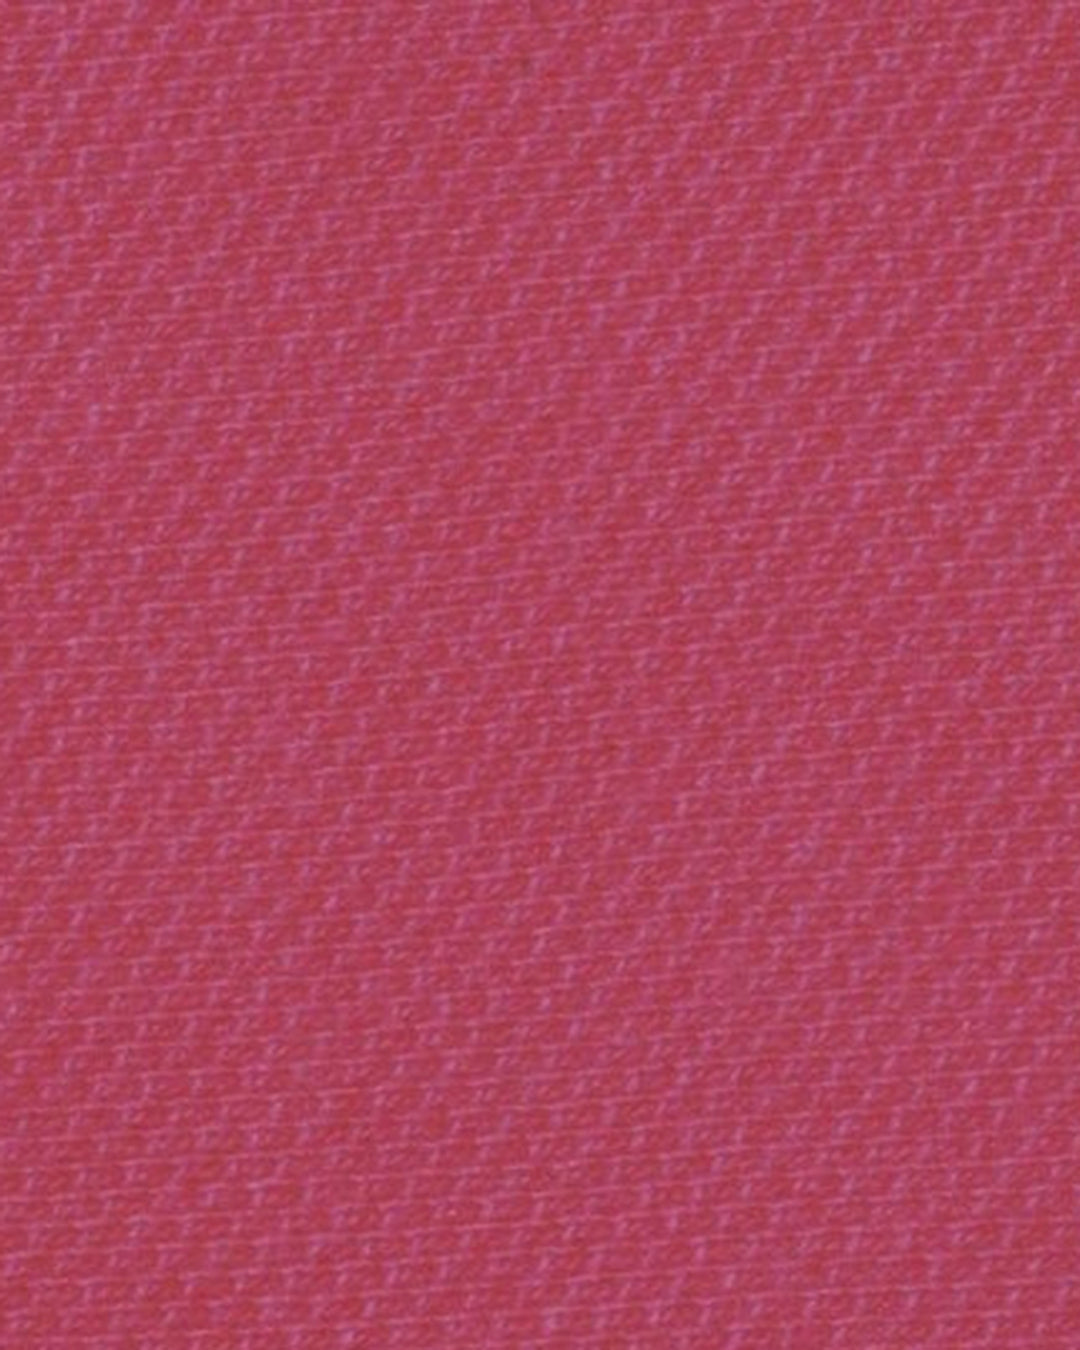 Close up of the custom oxford polo shirt for men by Luxire in pink